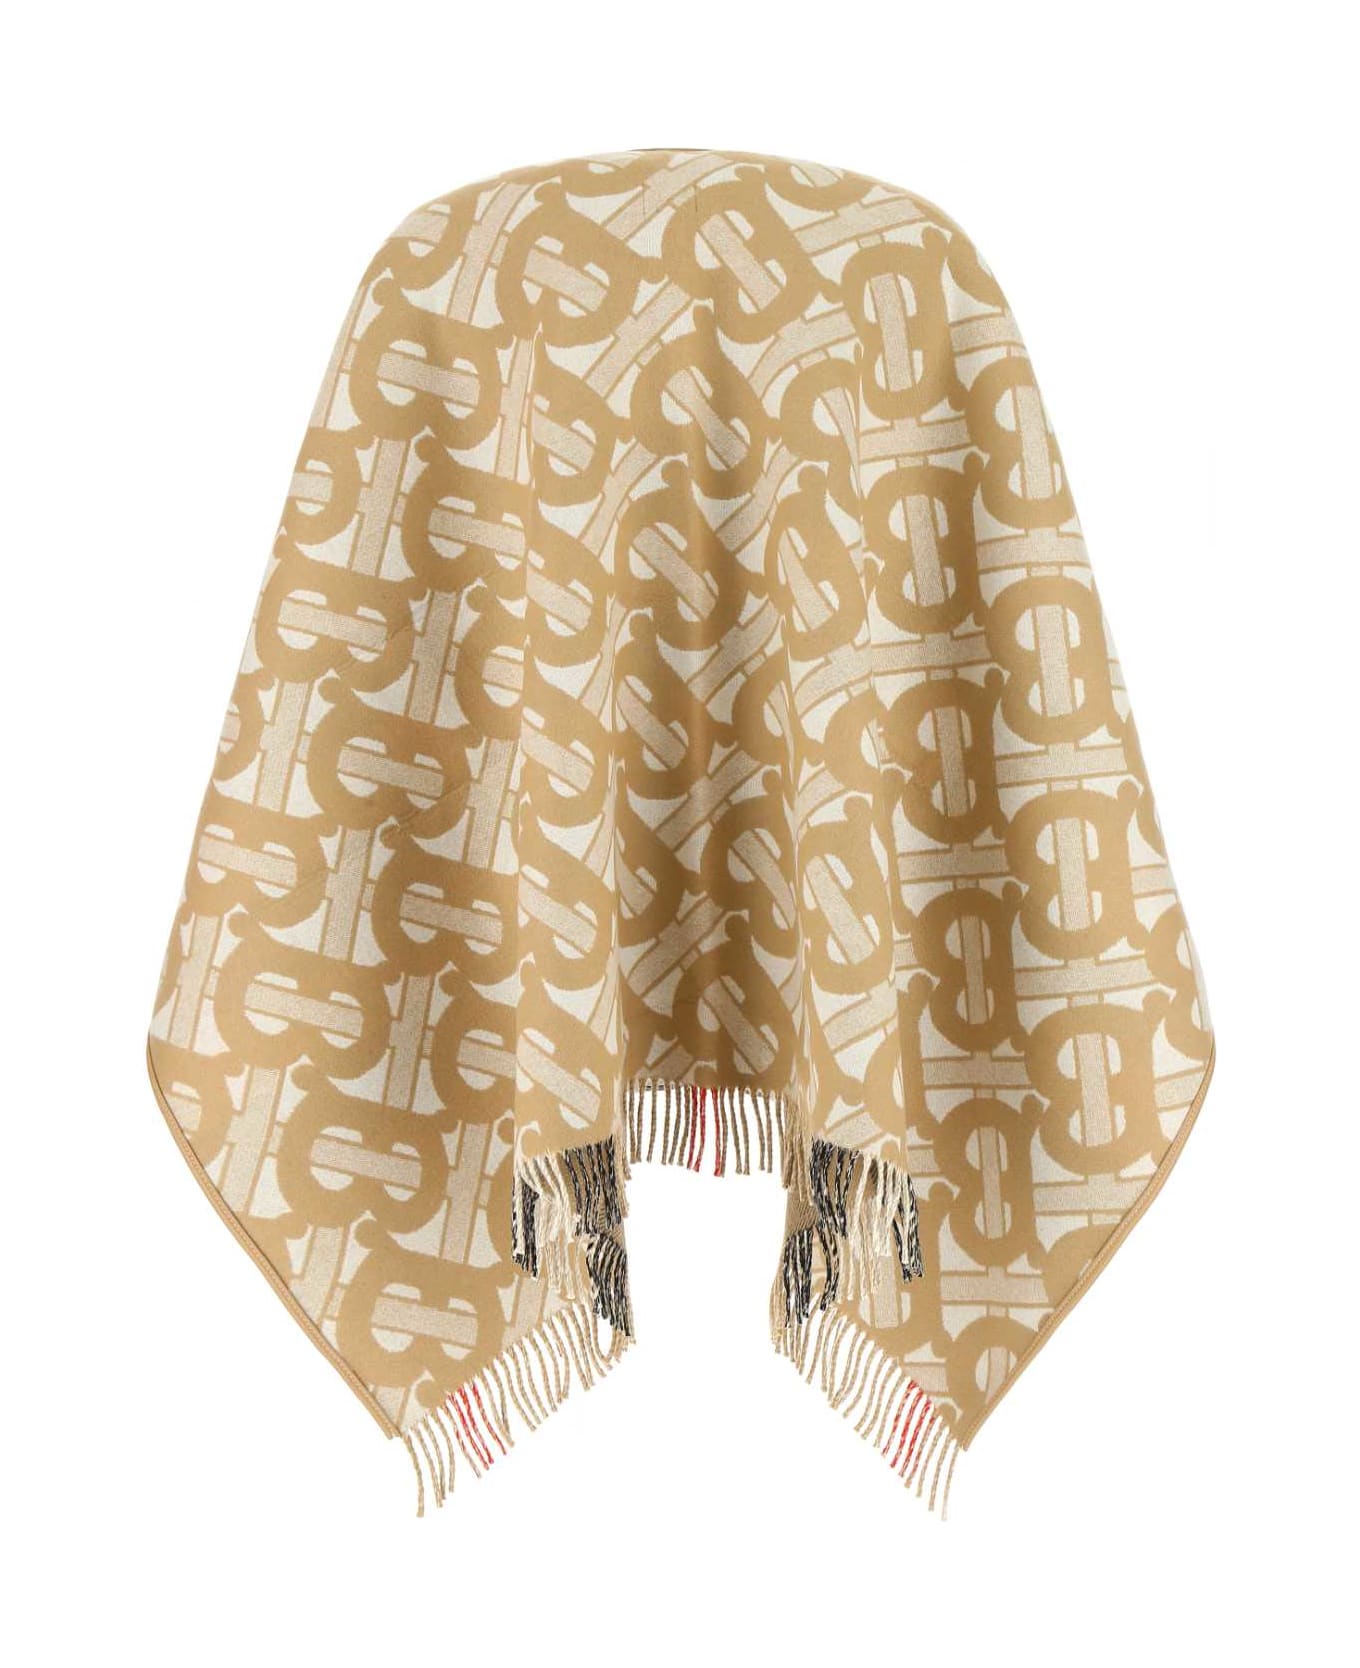 Burberry Embroidered Wool Blend Cape - A7026